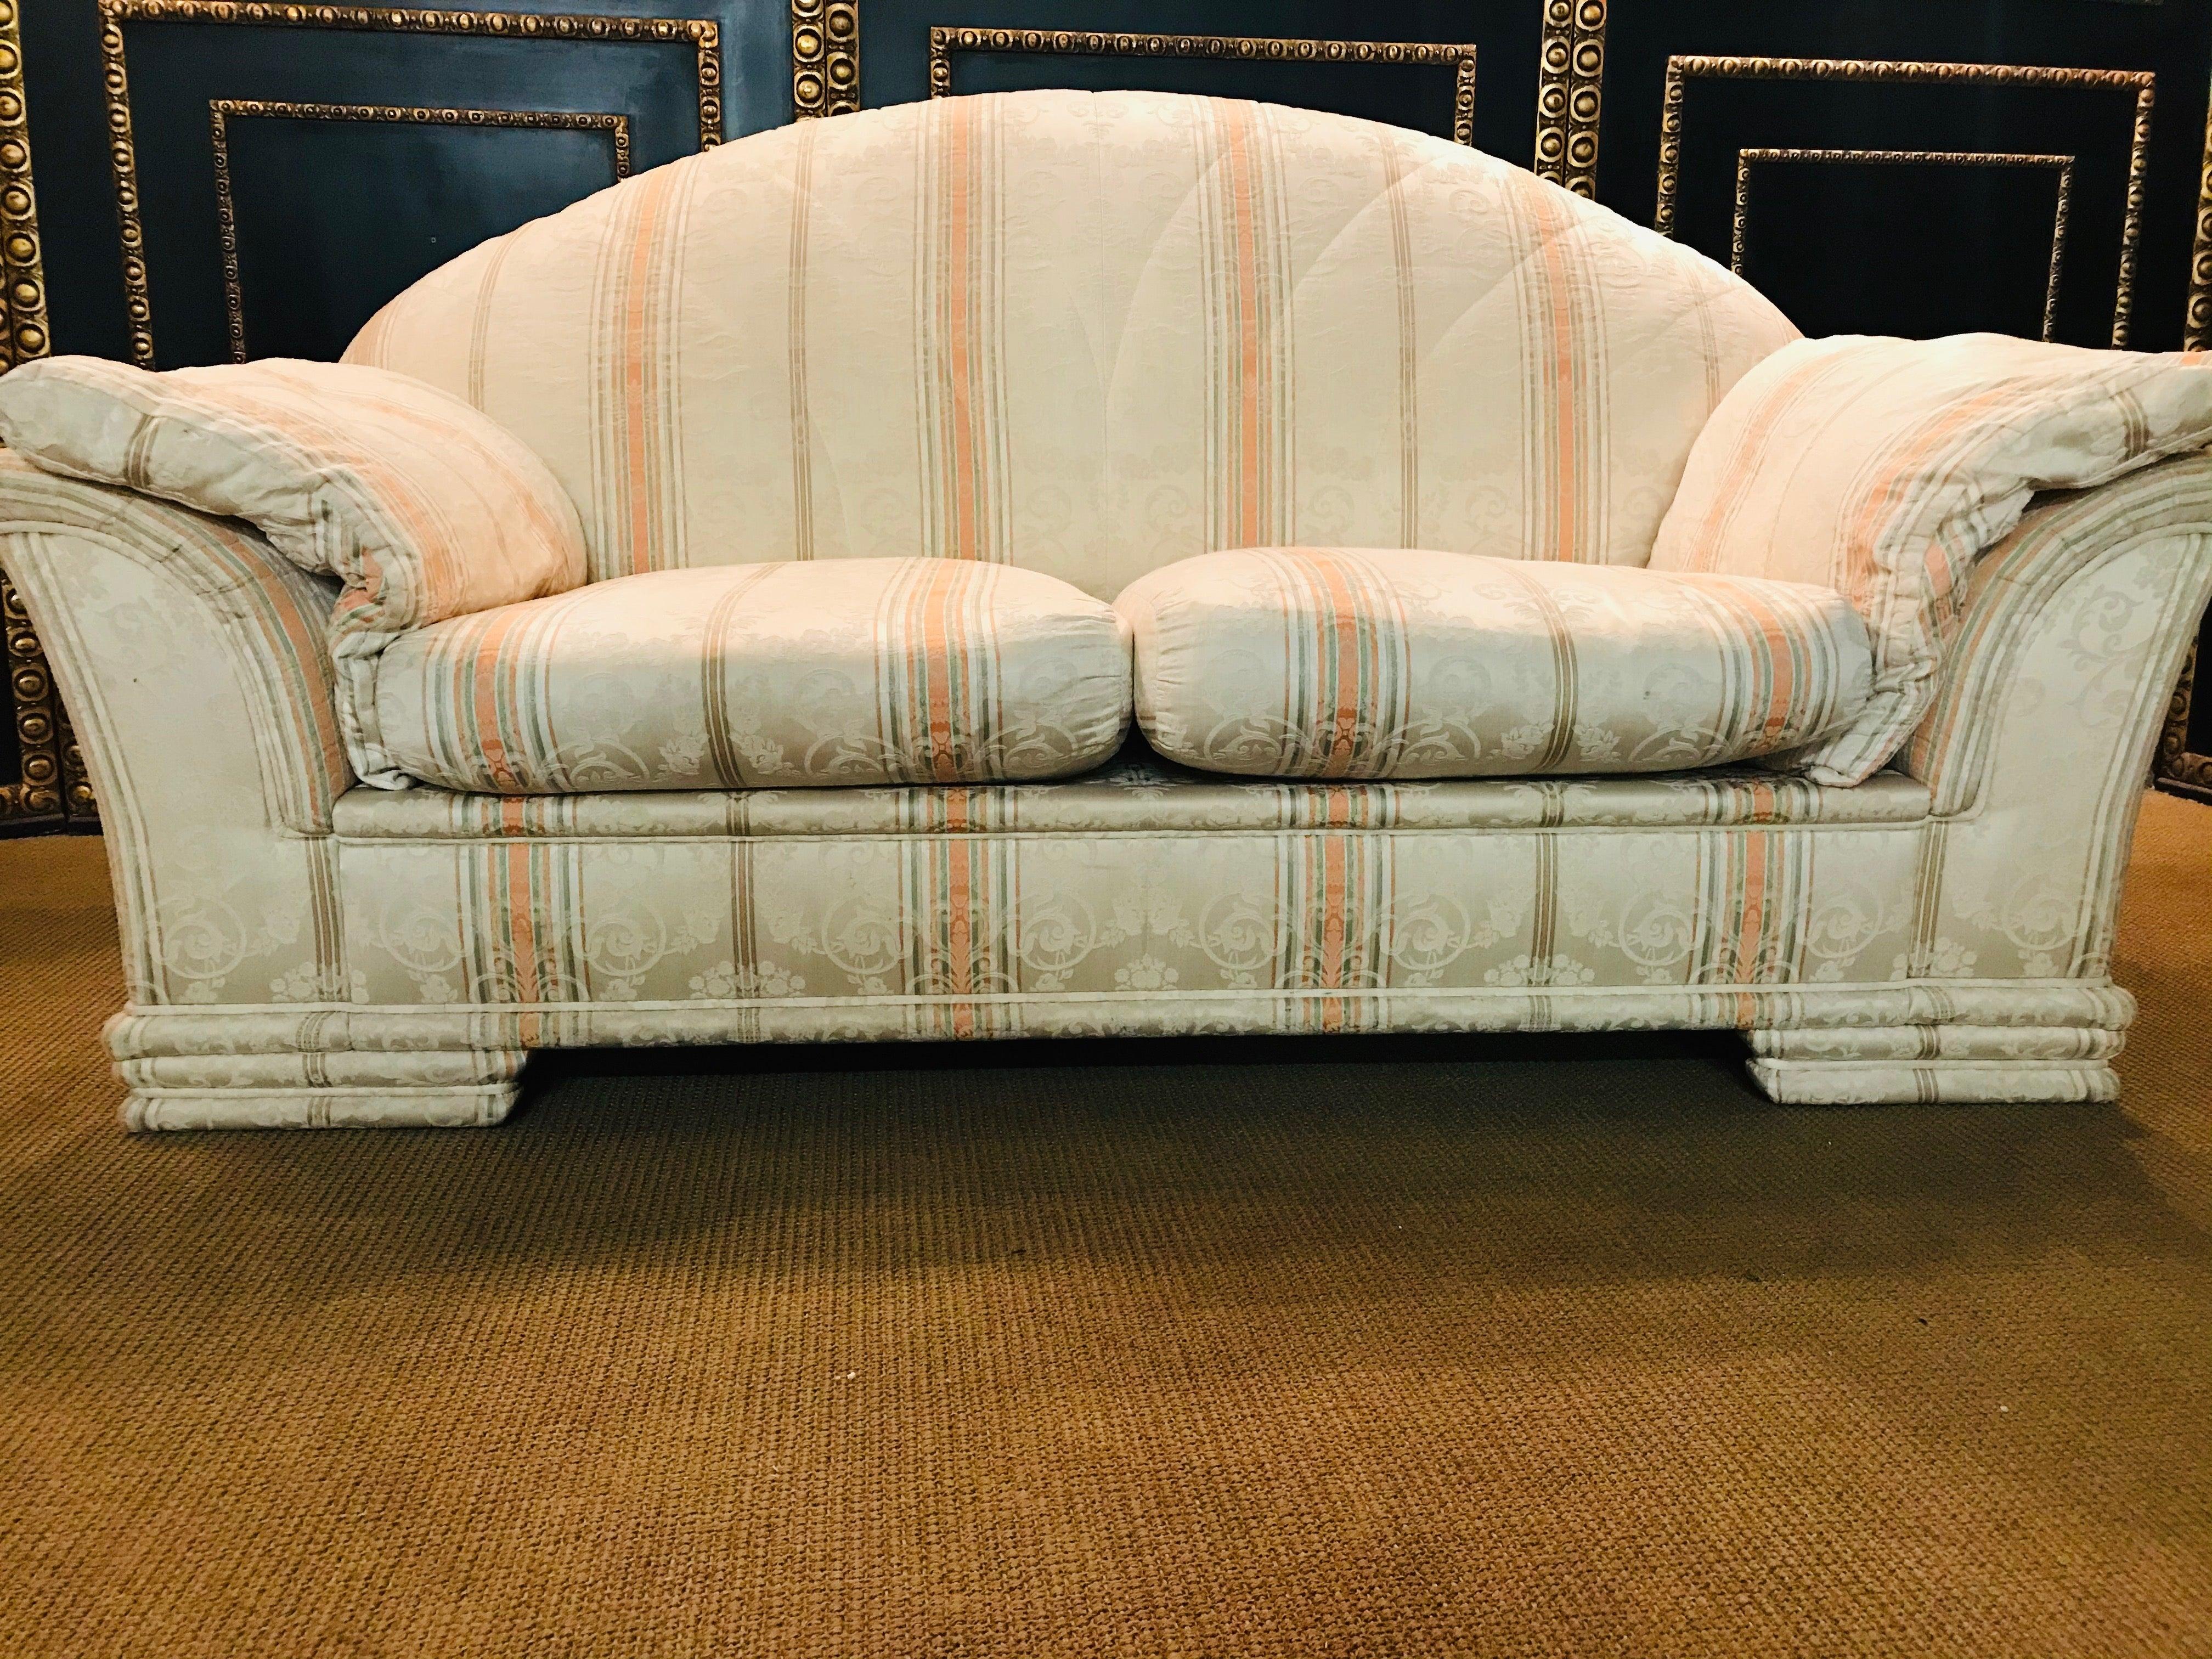 Very High-Quality Couch Set from the Bielefeld Workshops with Baroque Patterns 8